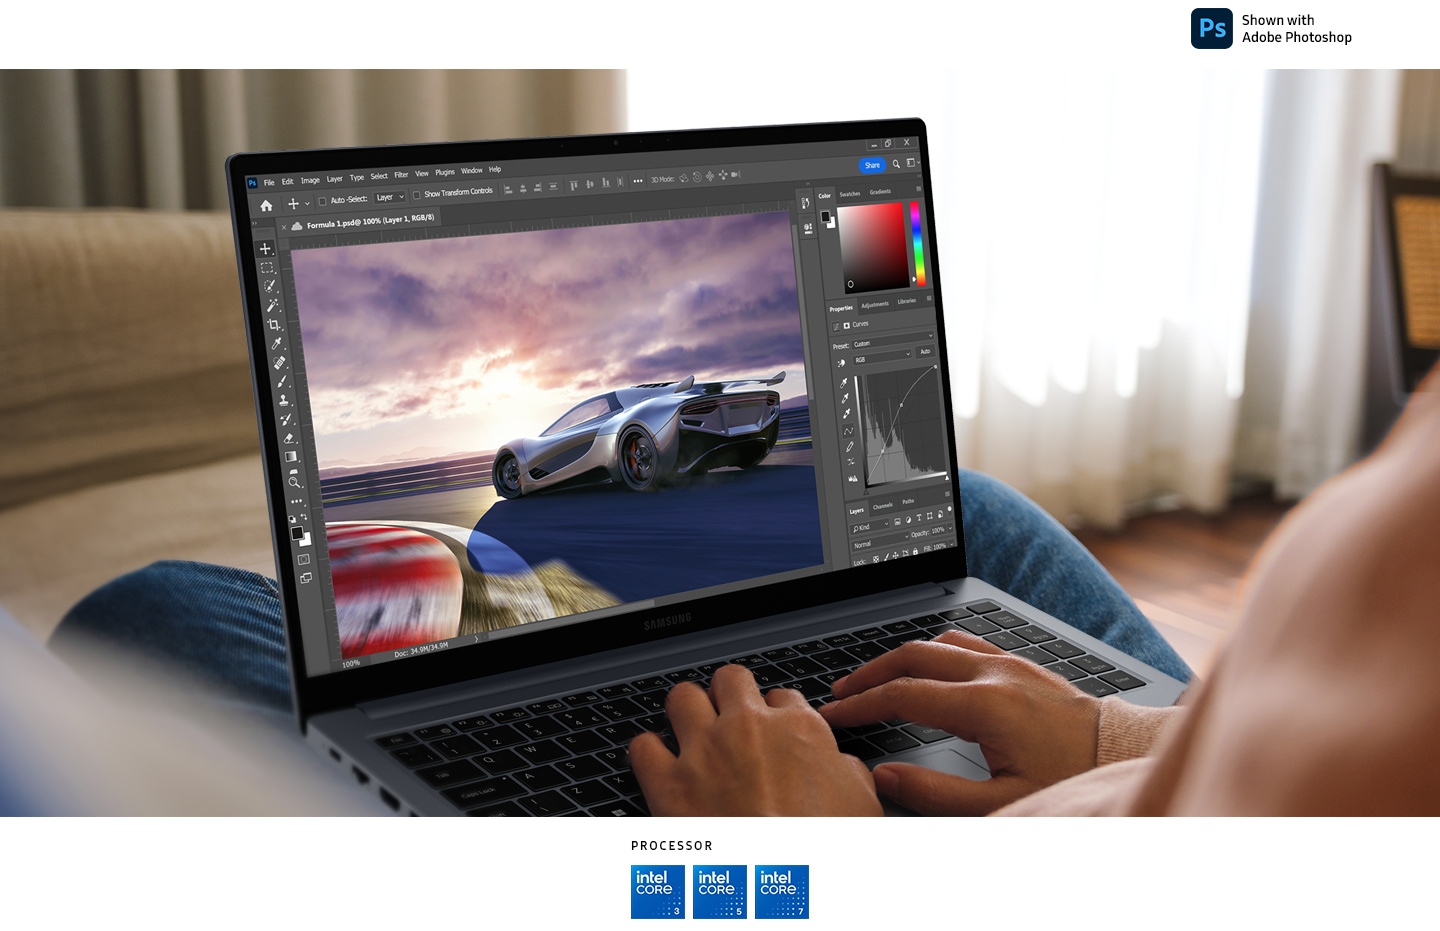 A person sitting at home is using Galaxy Book4 in Gray to edit an image of a racing car open in Adobe Photoshop app onscreen. Adobe Photoshop logo, Intel Core 3, Intel Core 5 and Intel Core 7 processor logos are shown.